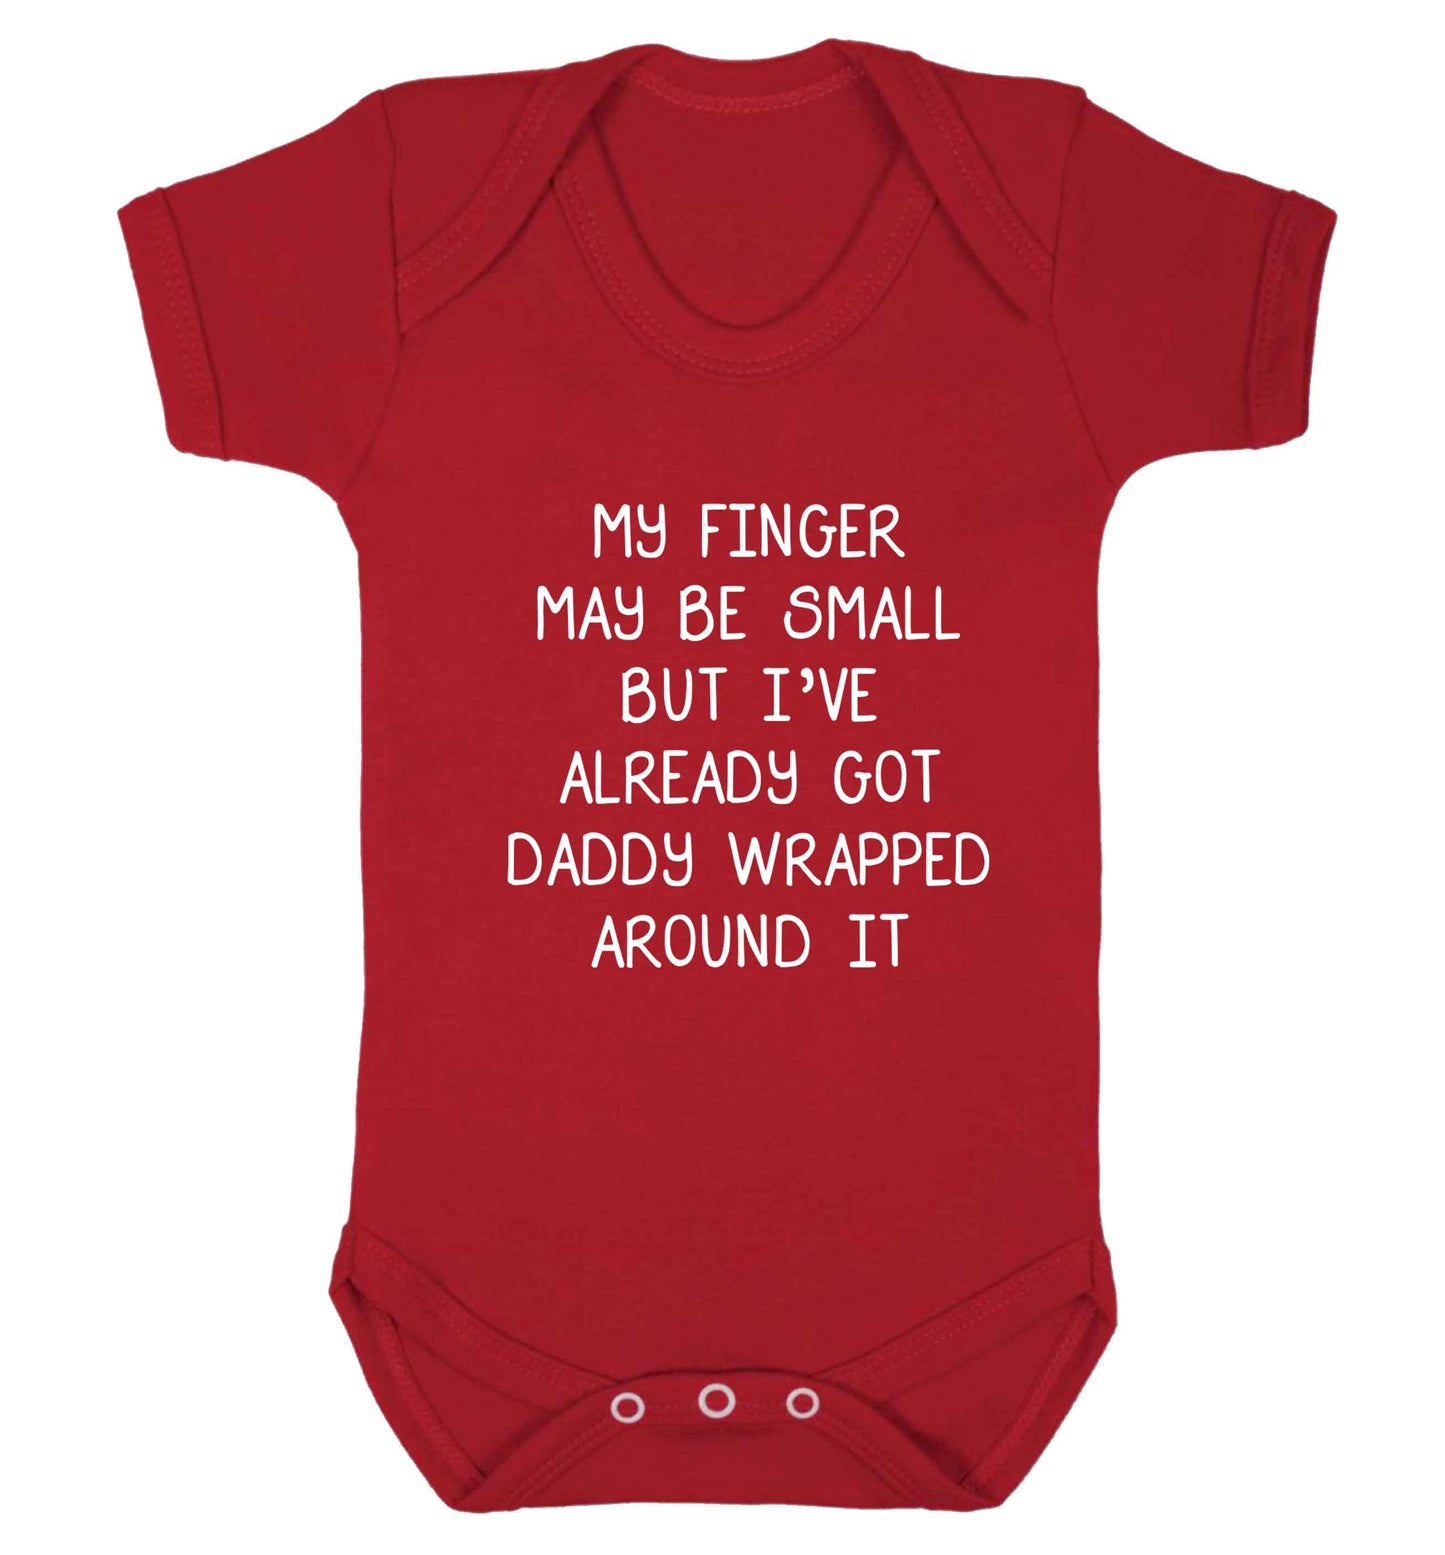 My finger may be small but I've already got daddy wrapped around it baby vest red 18-24 months